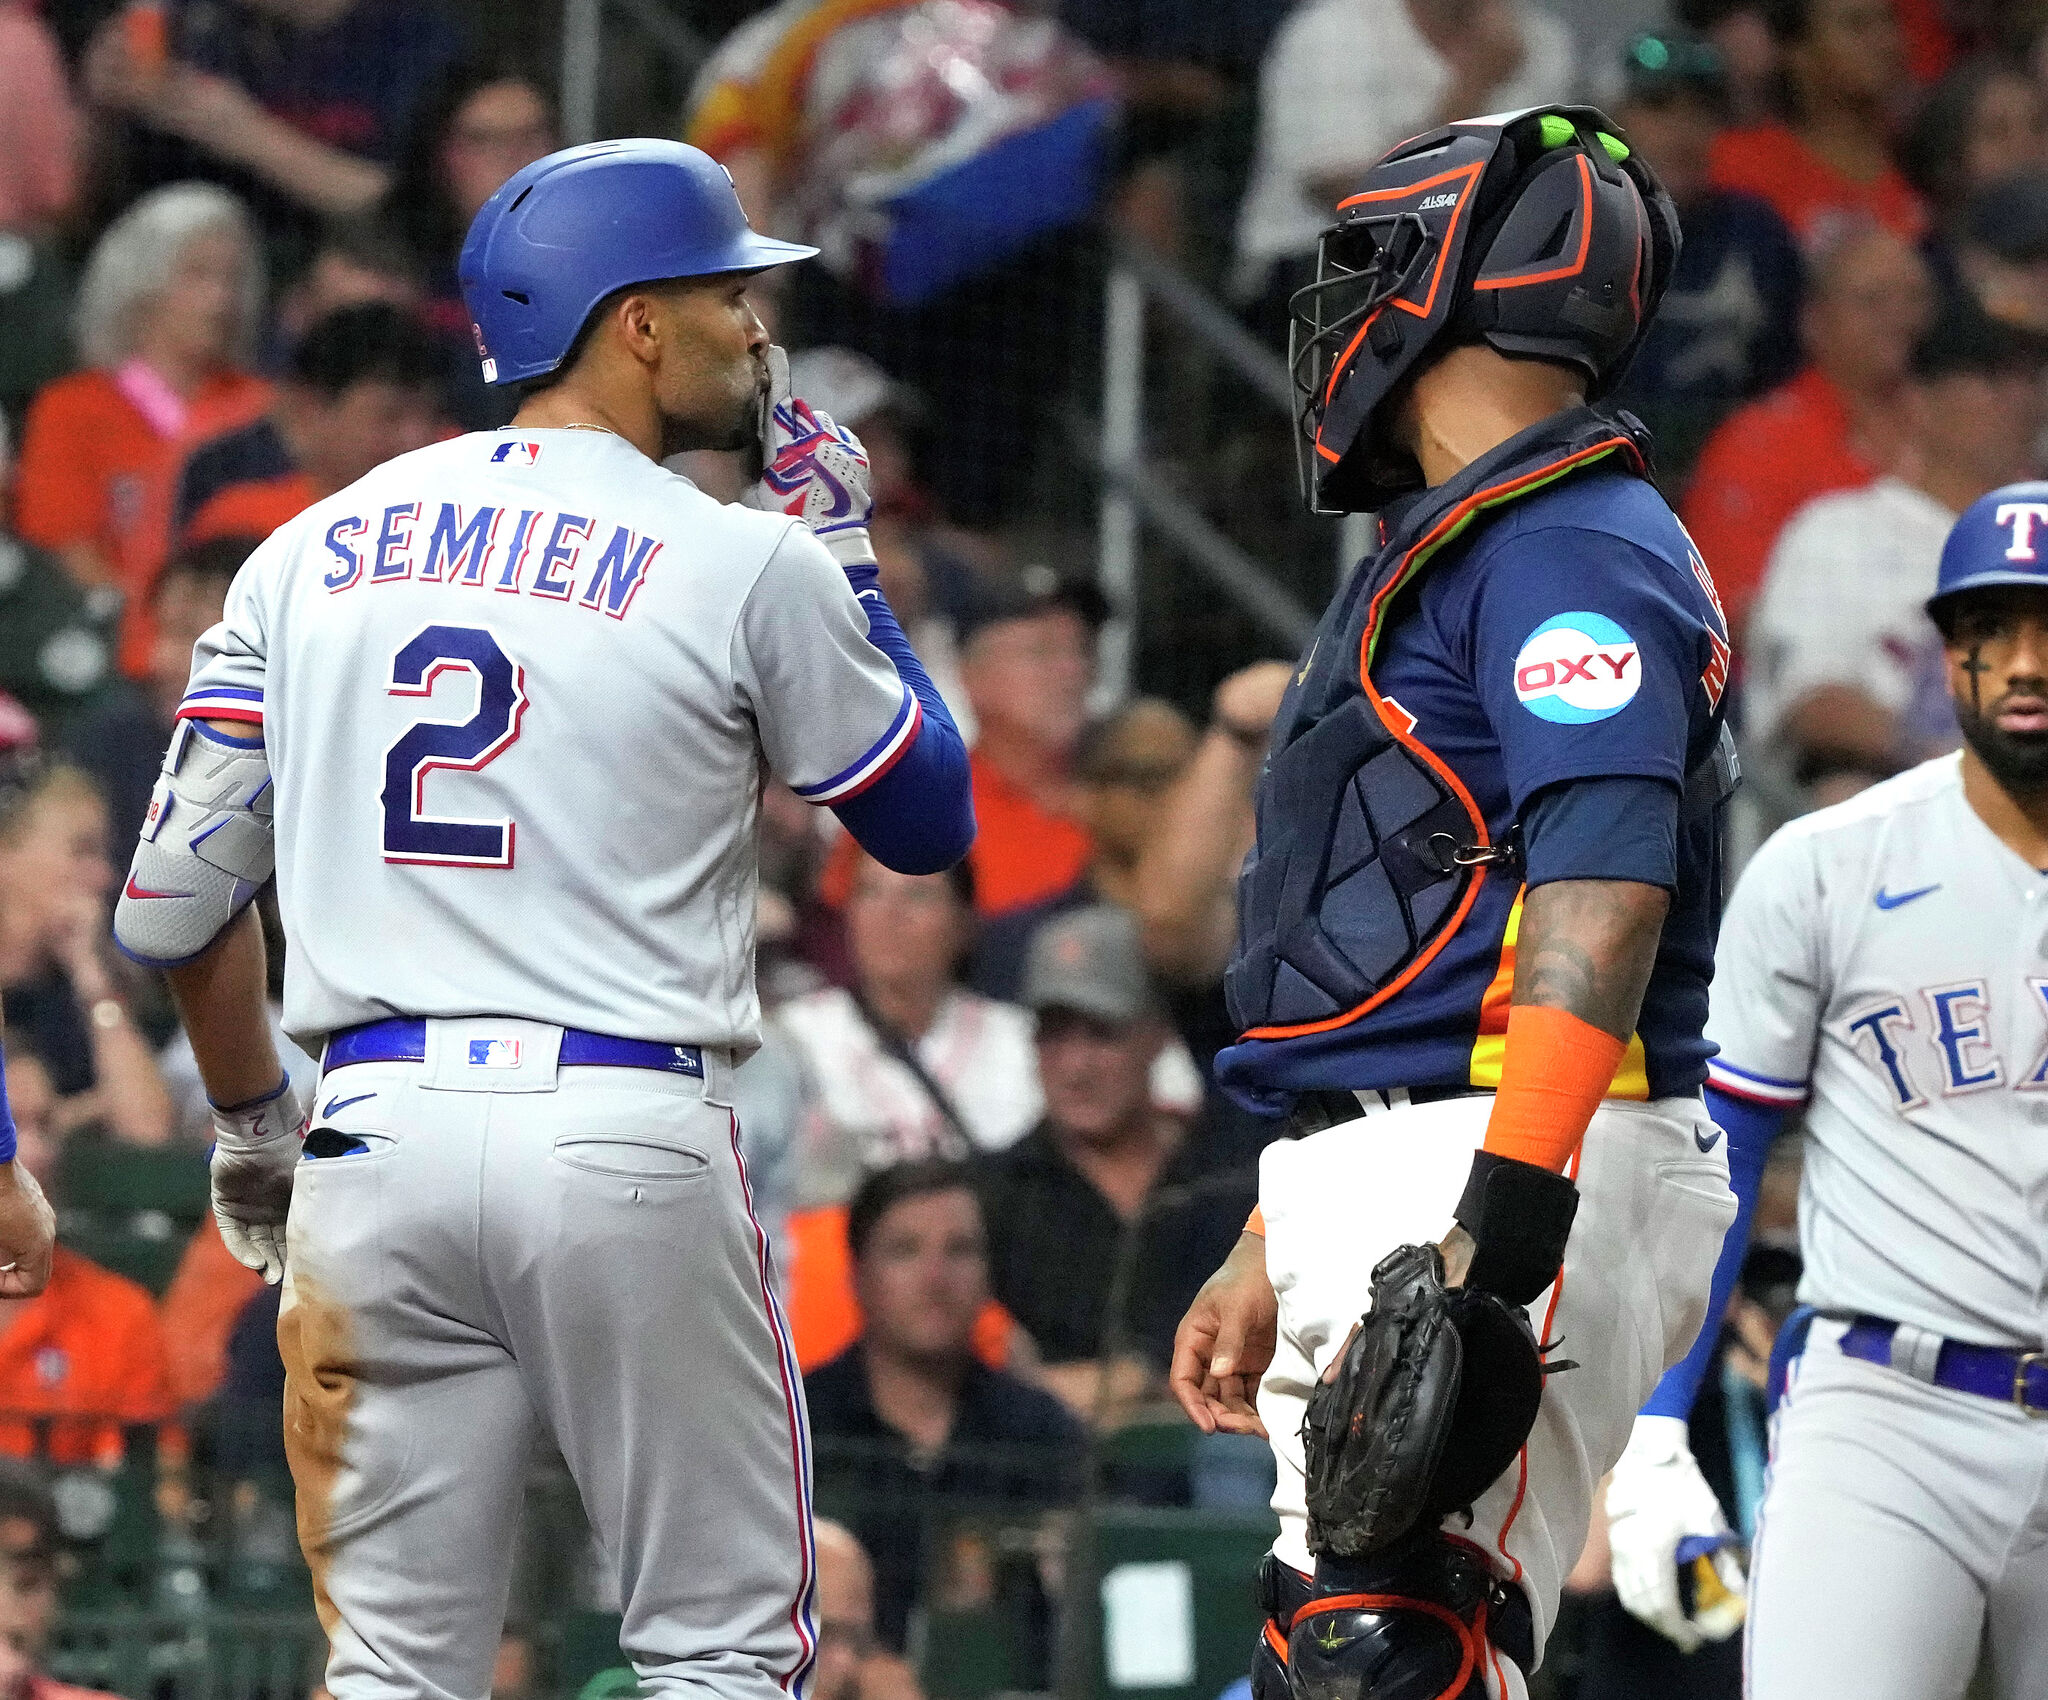 Astros-Rangers rivalry reignited after bench-clearing scuffle